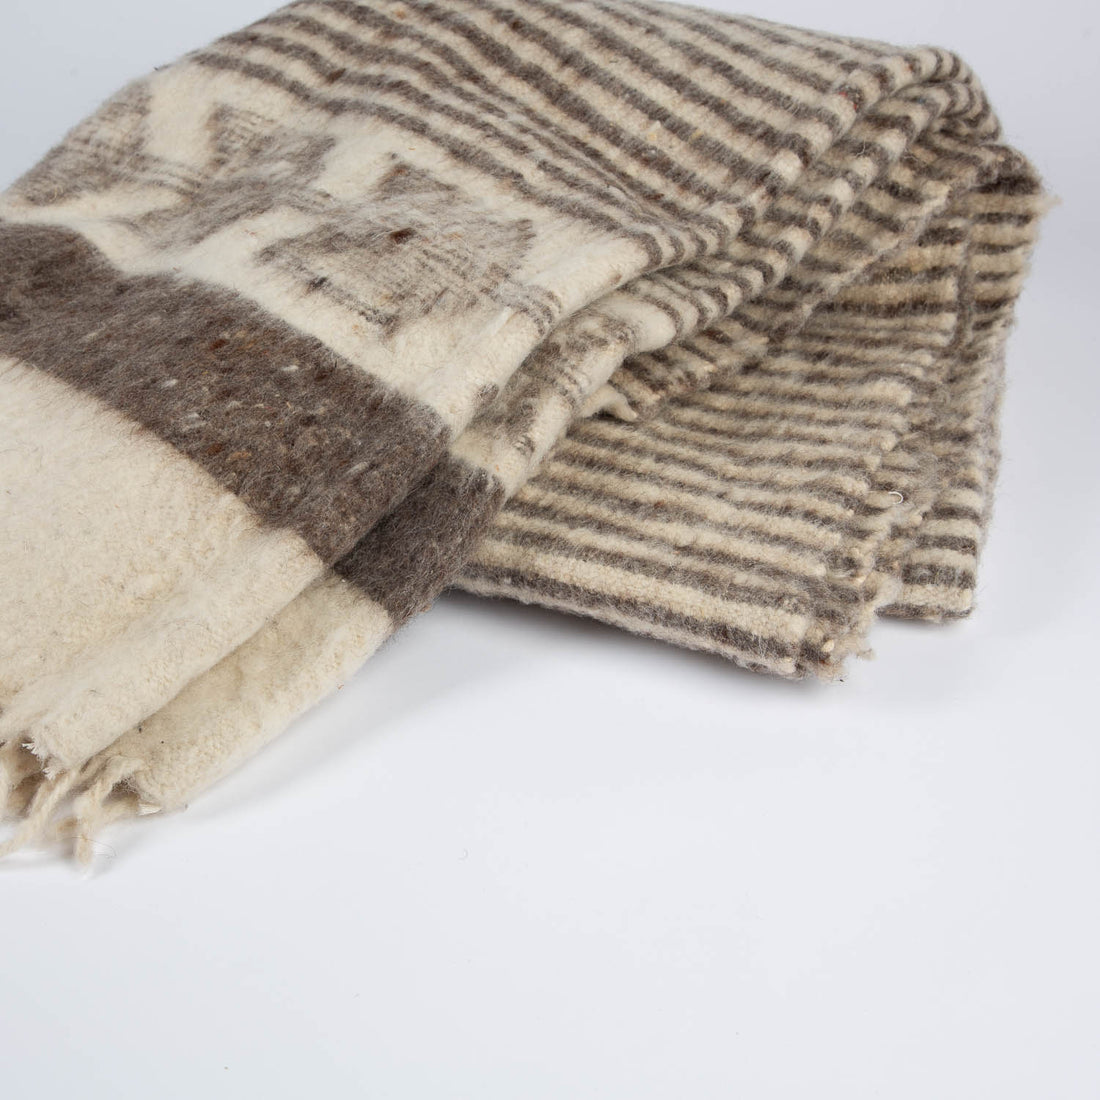 Handwoven Mexican Wool Blanket - Thin Stripe